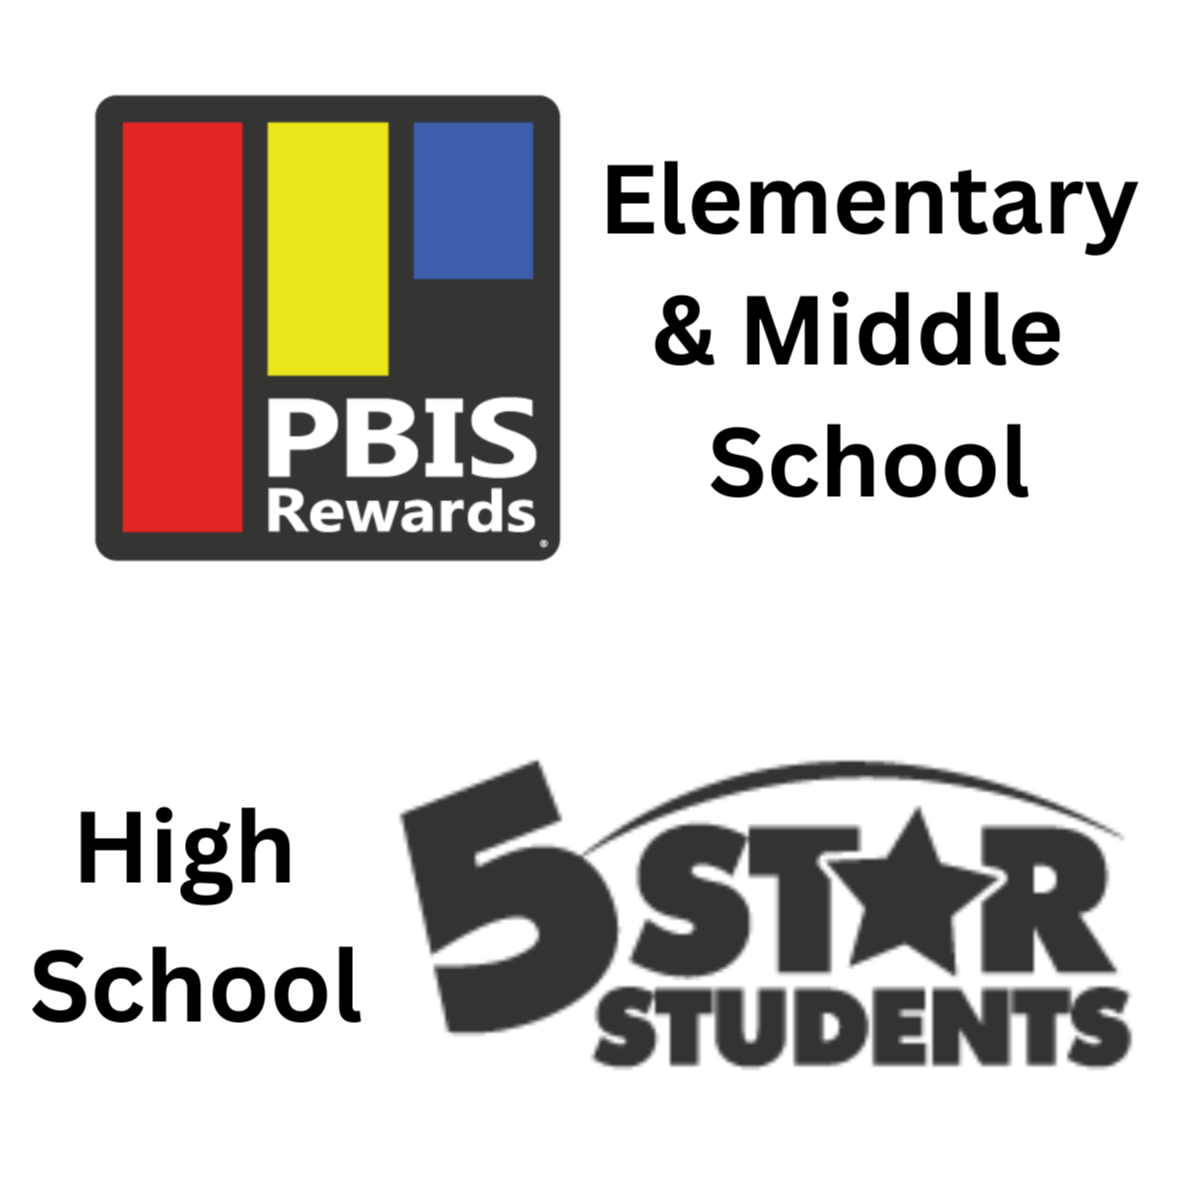 PBIS Rewards and 5 Star Students Getting Started